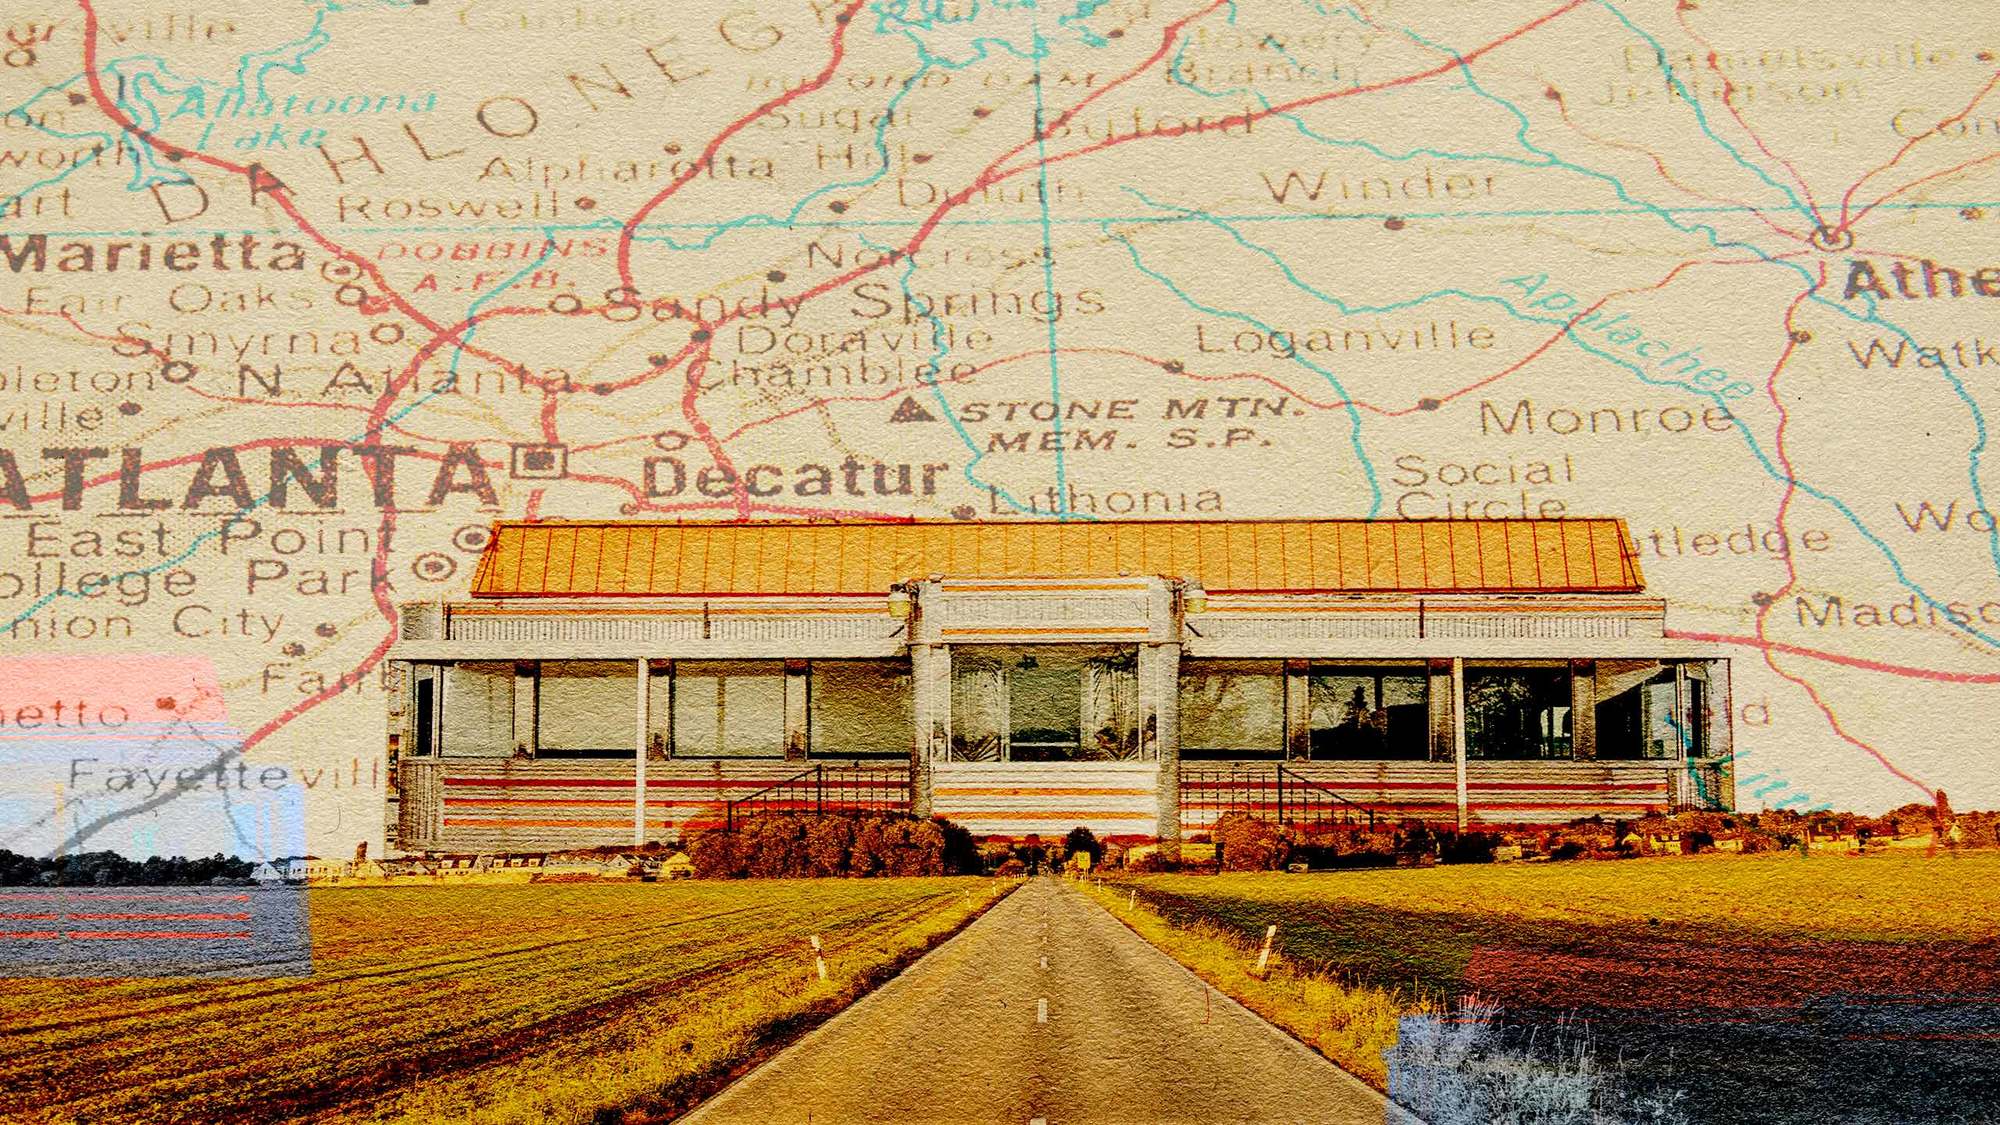 Rural road on textured paper goes into the distance with blue lens flares on sides and reaches an old restaurant with georgia map in the background January 2021.